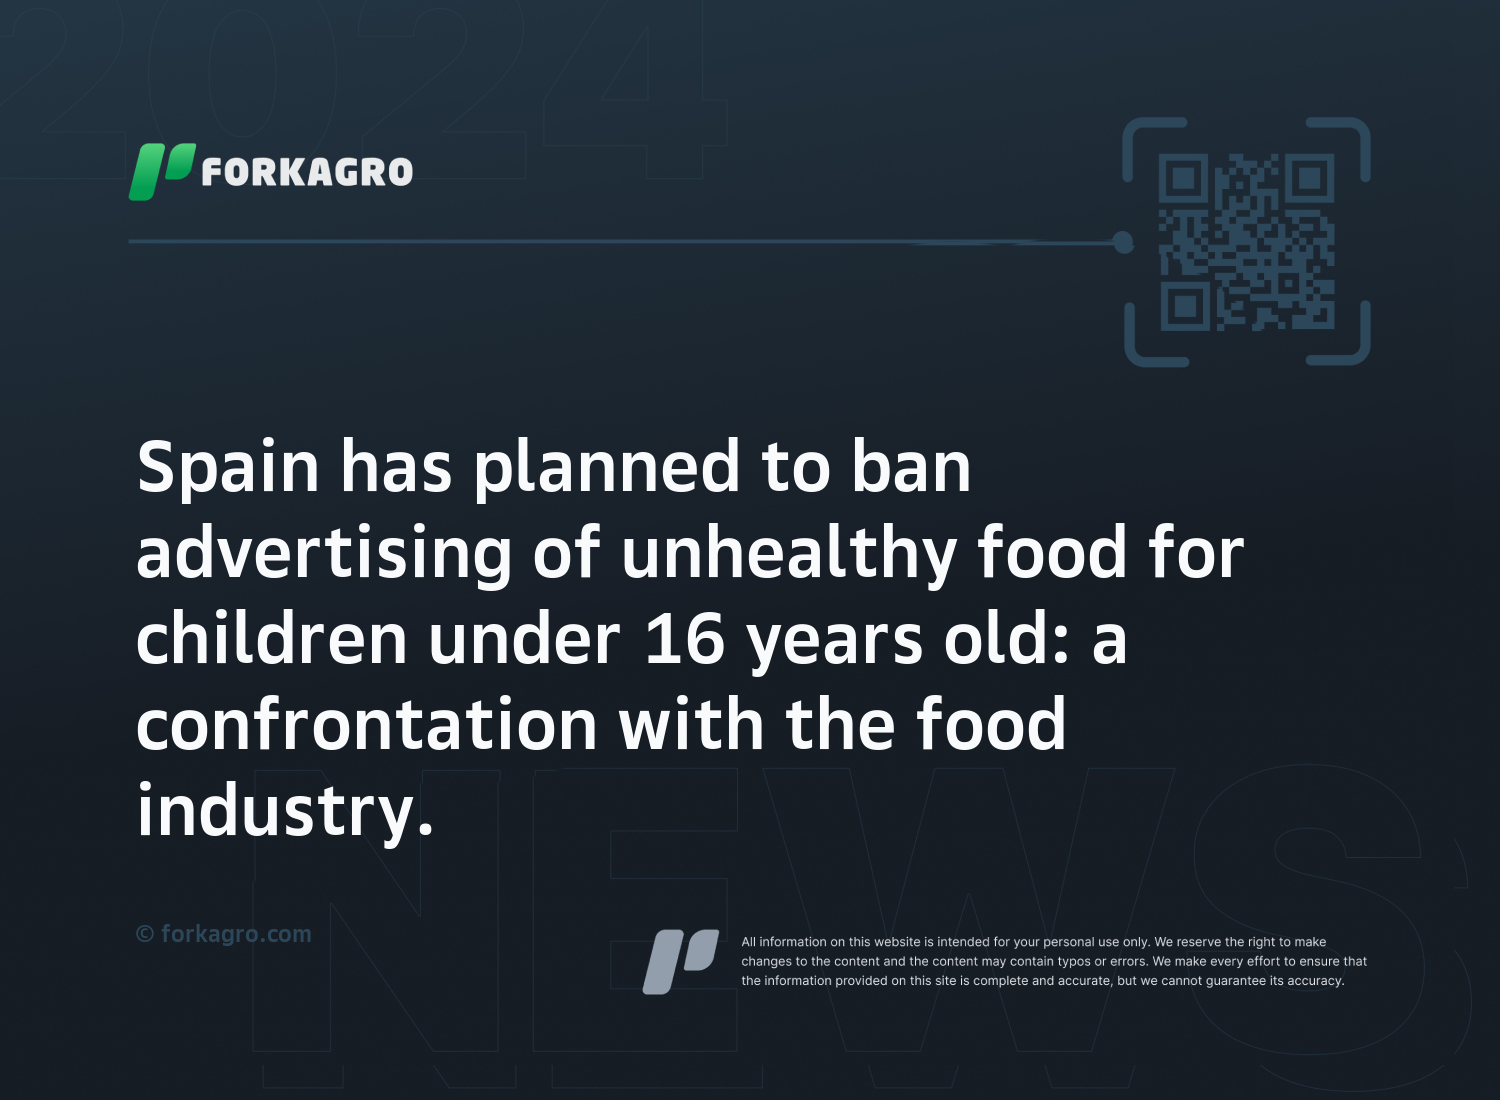 Spain has planned to ban advertising of unhealthy food for children under 16 years old: a confrontation with the food industry.